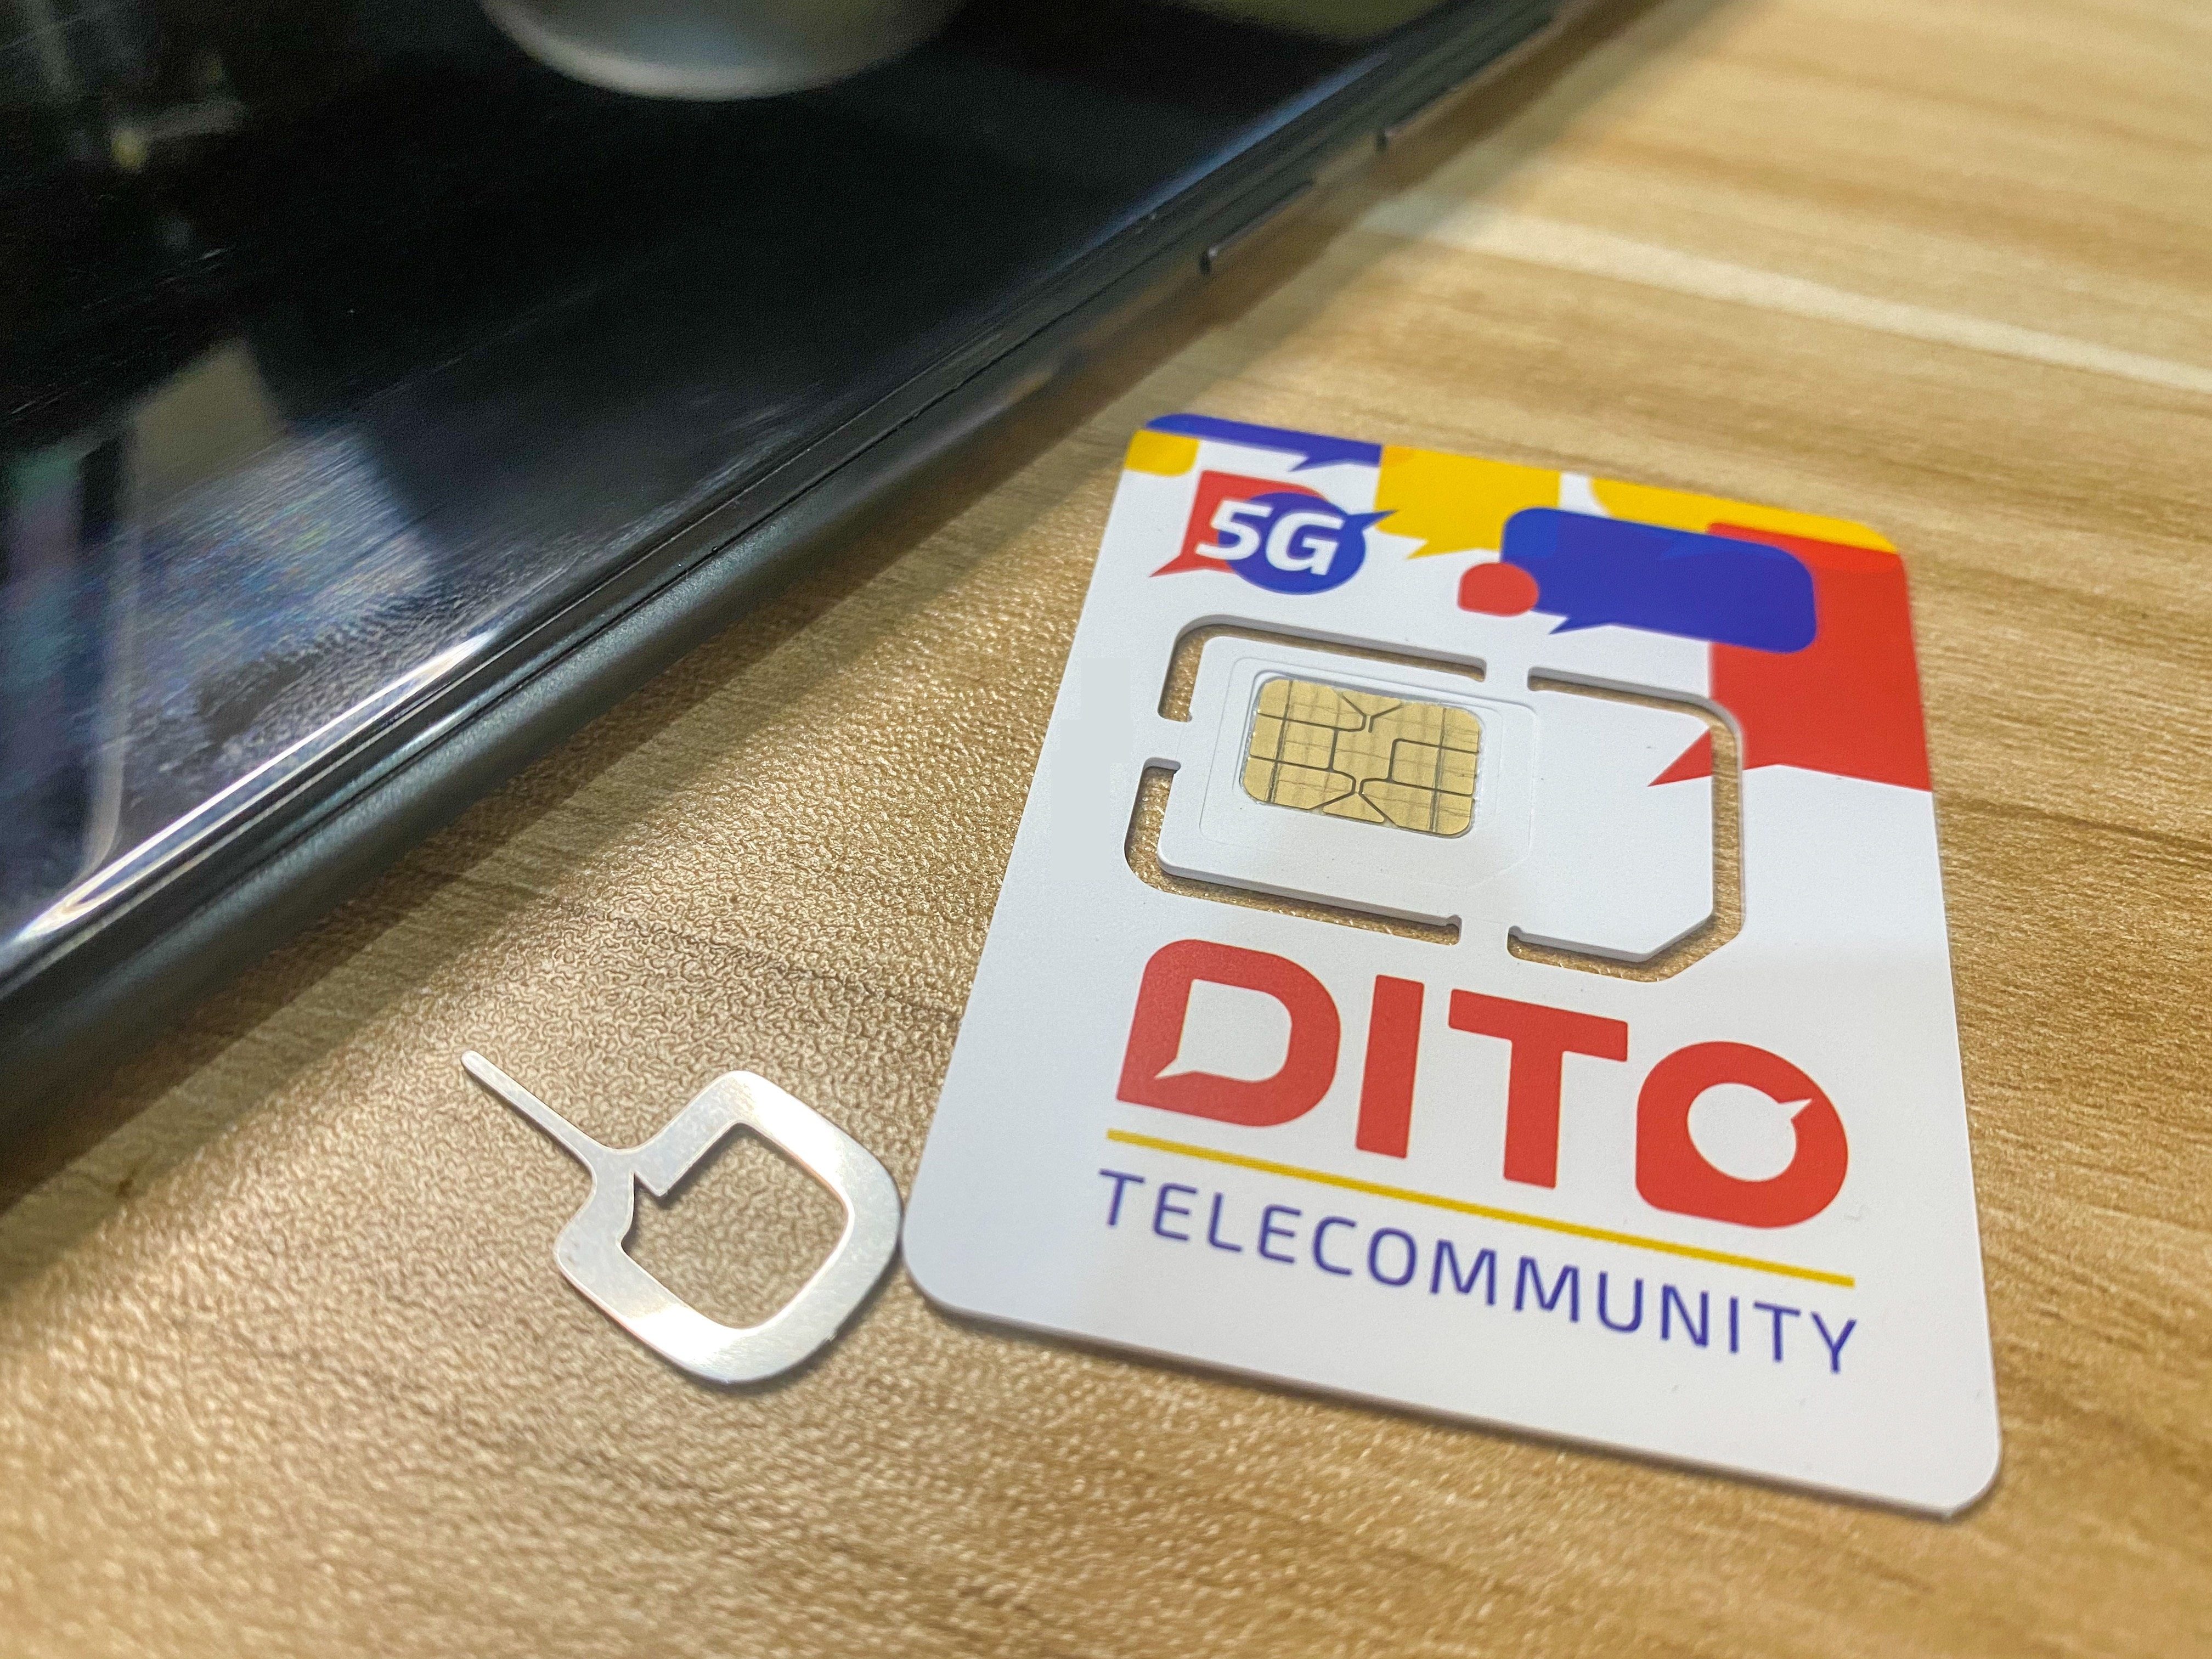 Dito reaches 4 million users, continues expansion